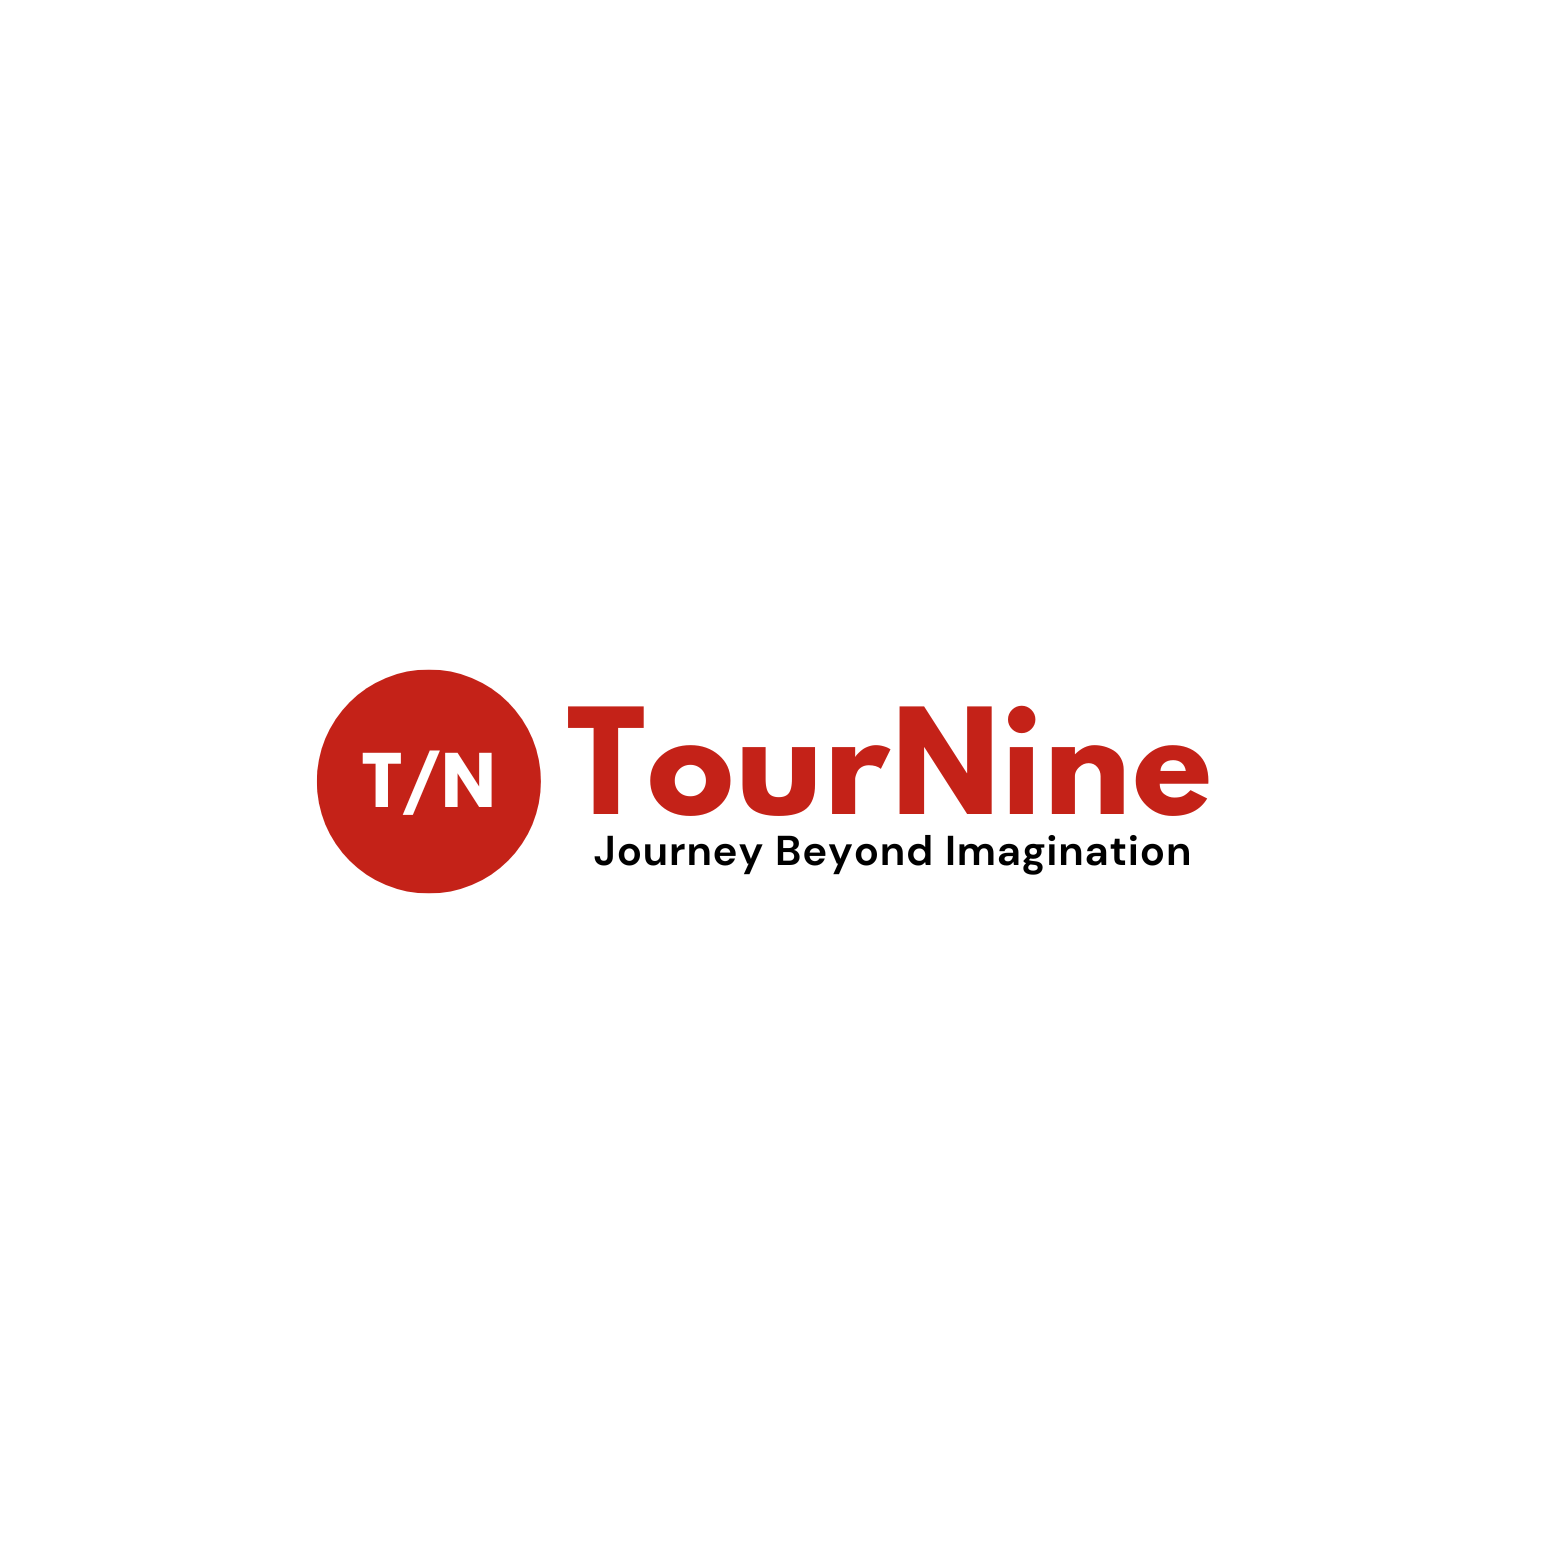 TourNine Travel Agency & Tour Packages